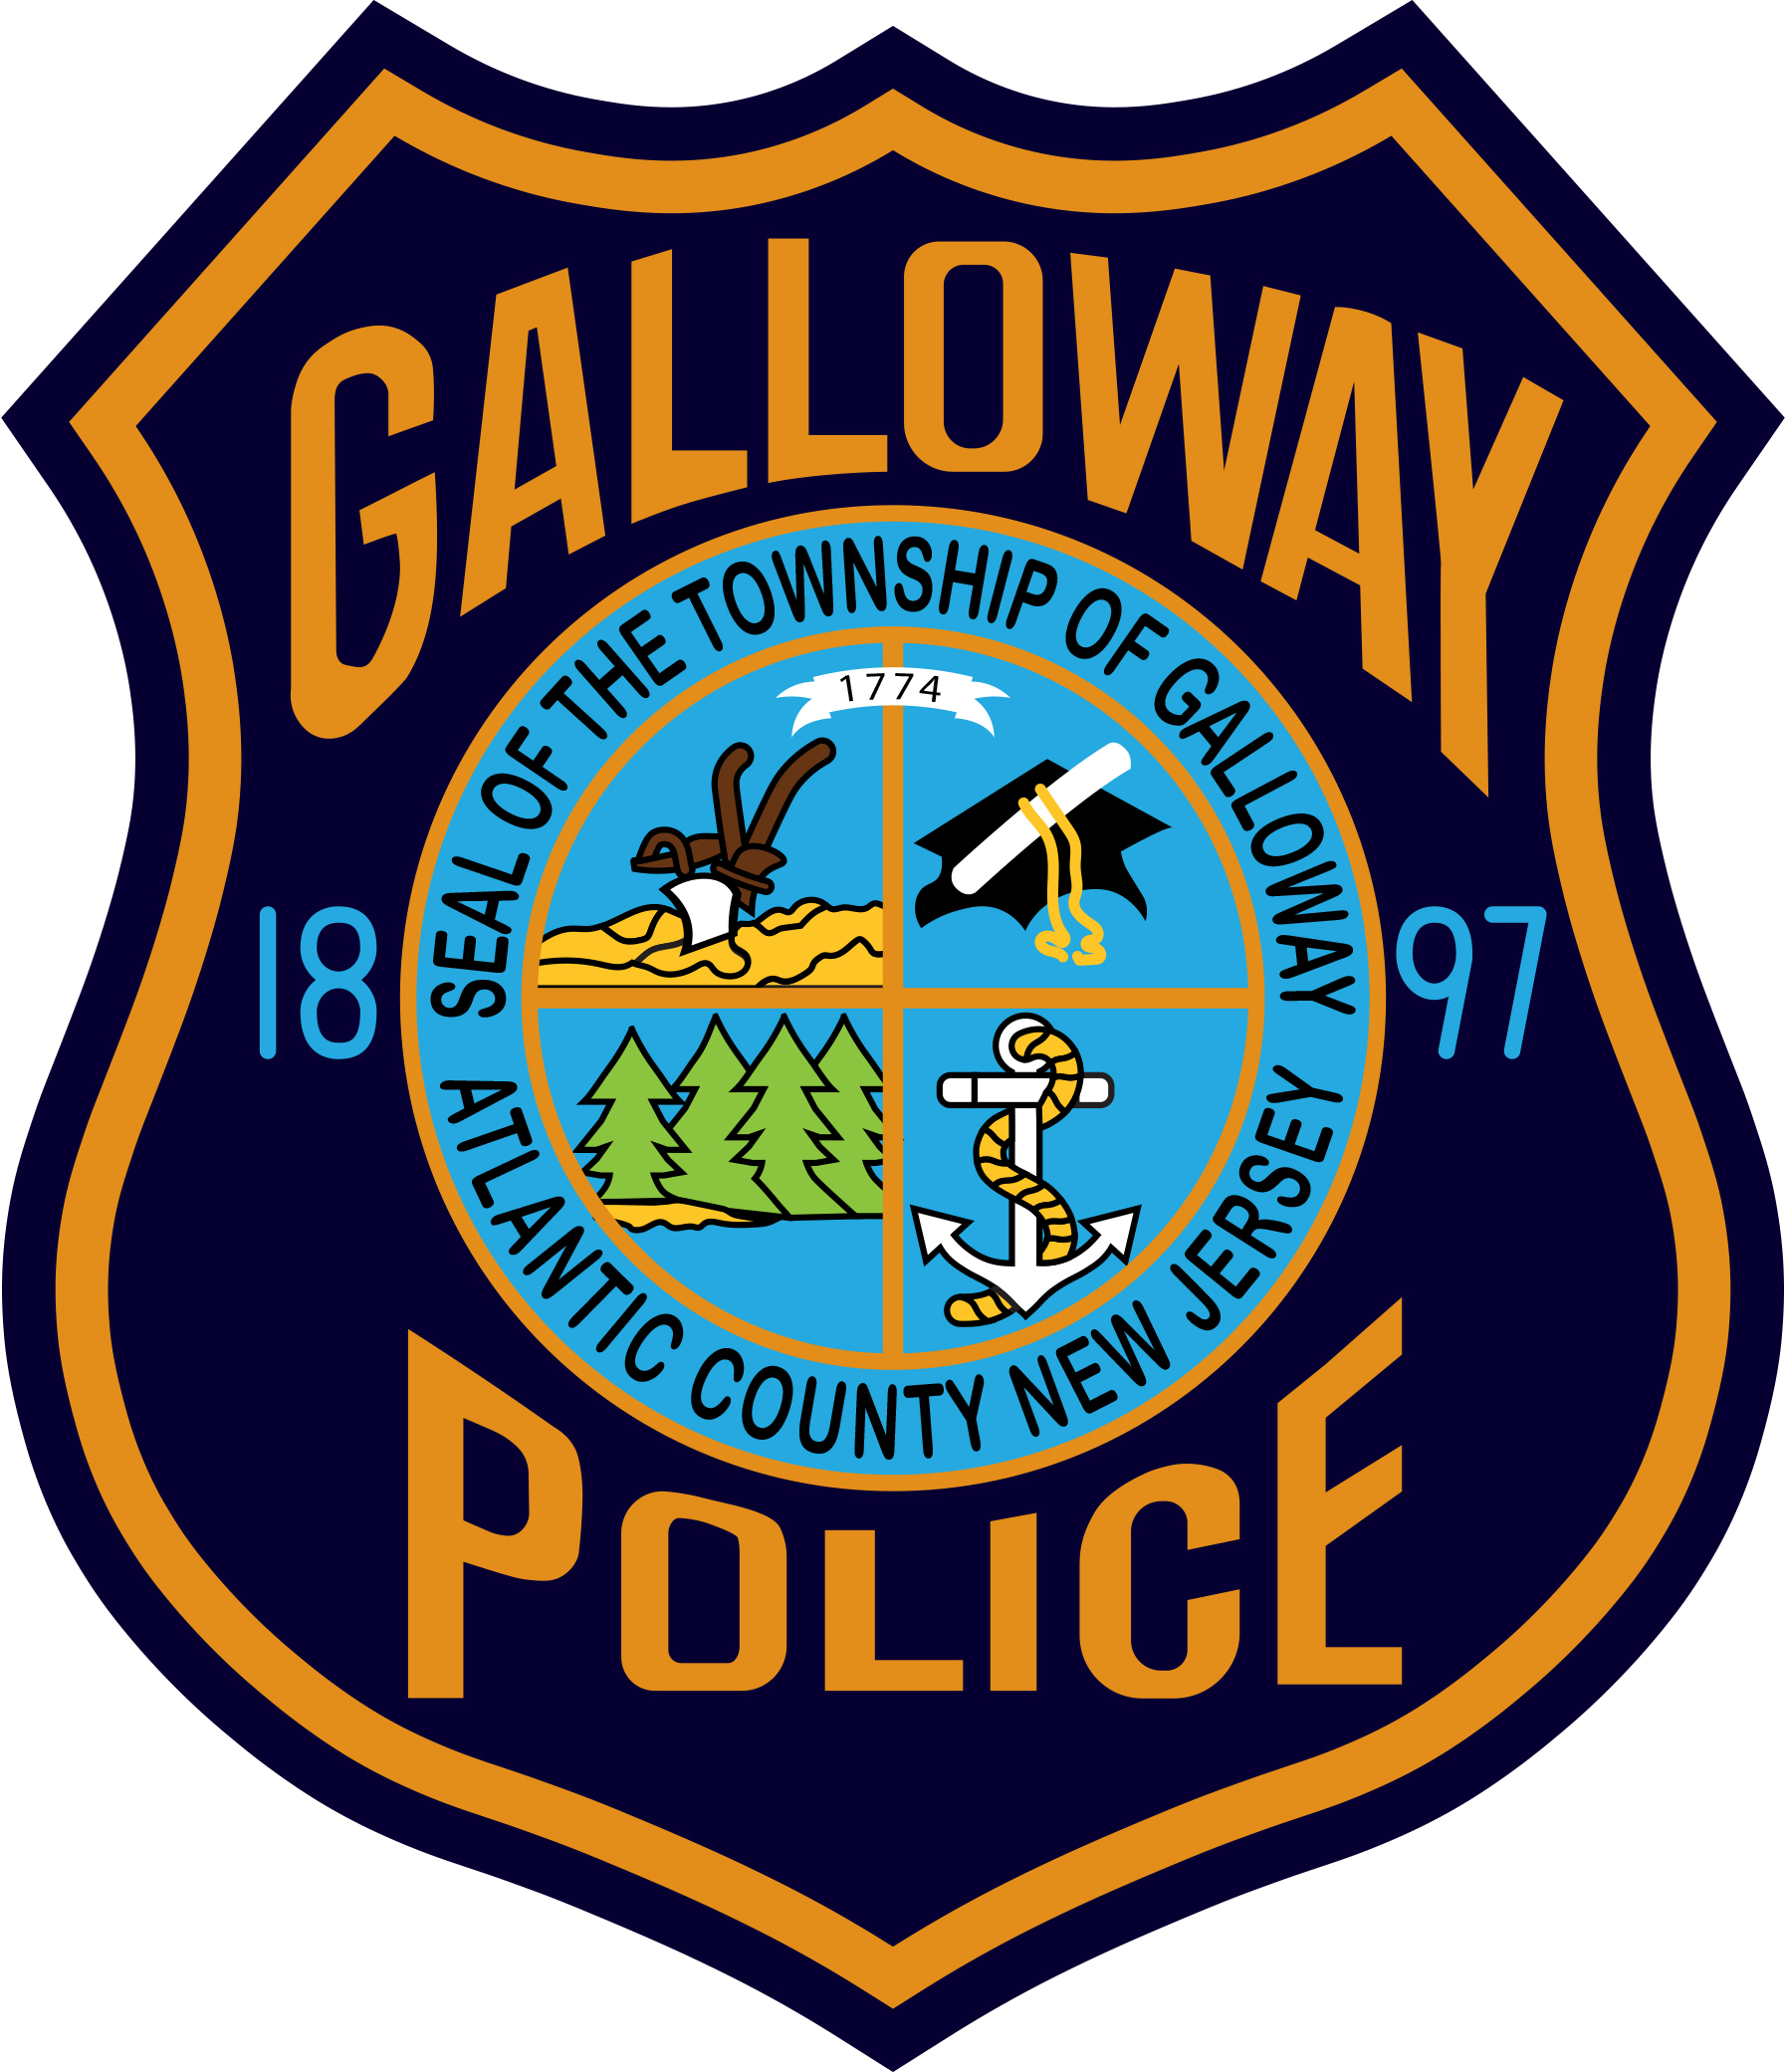 Galloway Township Police Department, NJ 